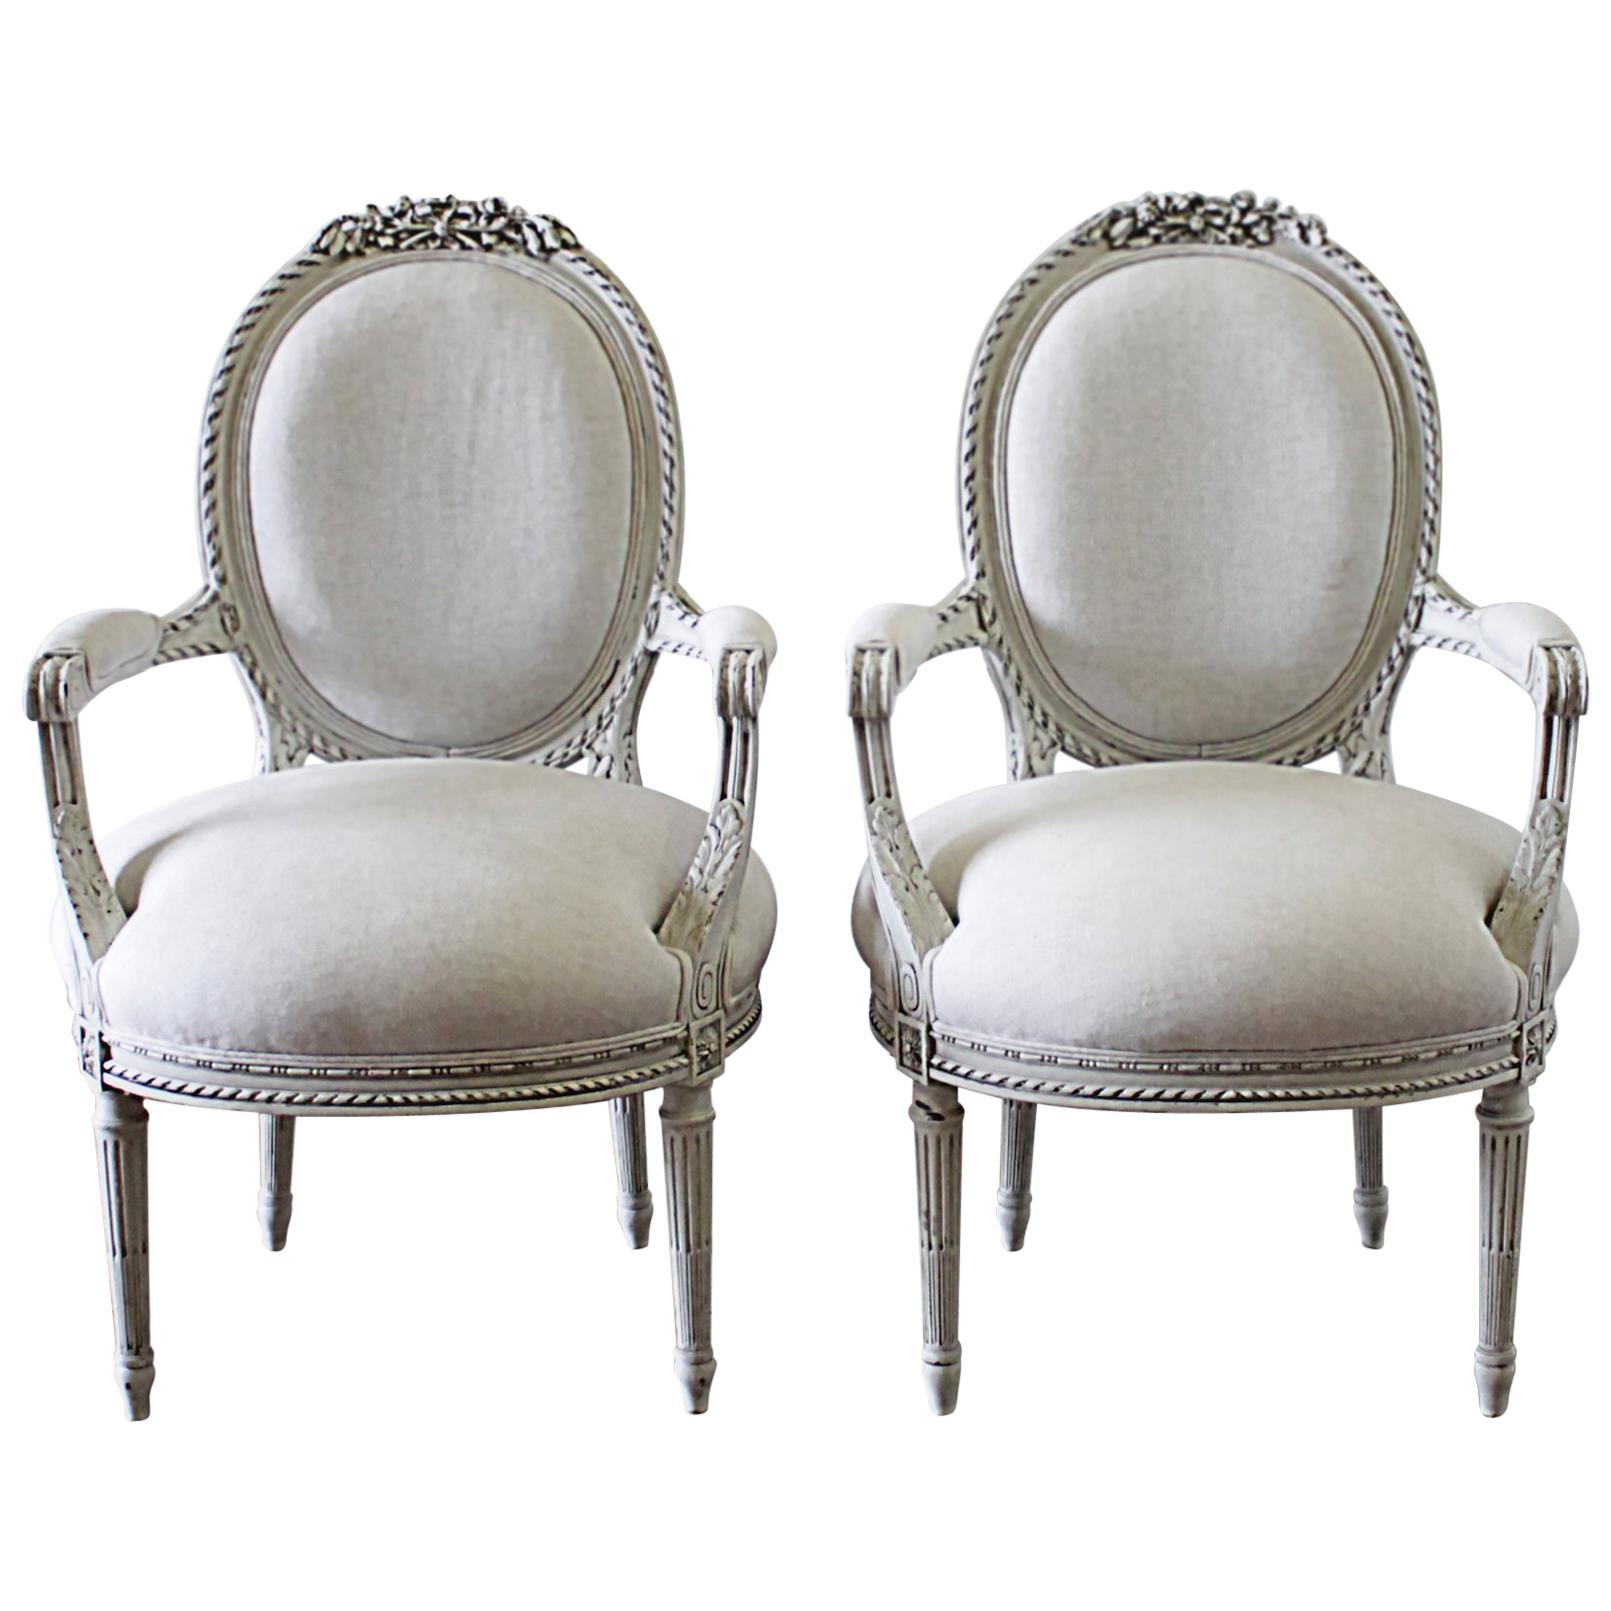 Early 20th Century Carved and Painted Louis XVI Style French Open Arm Chairs